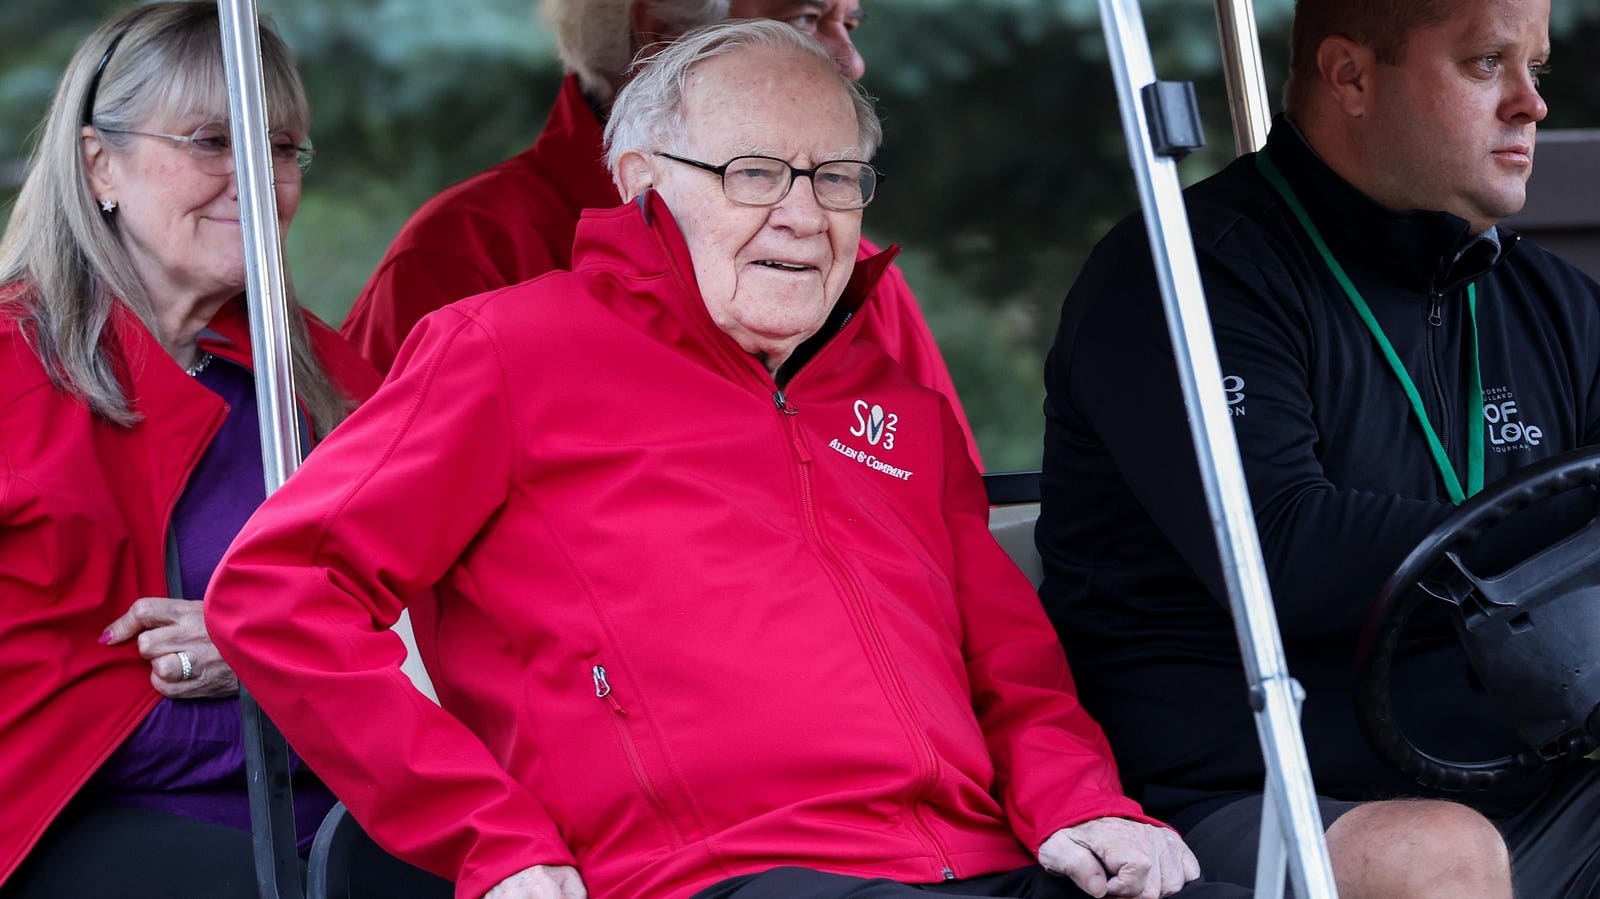 Berkshire Hathaway Stock No Longer Appears Down 100% As NYSE Fixes Glitch